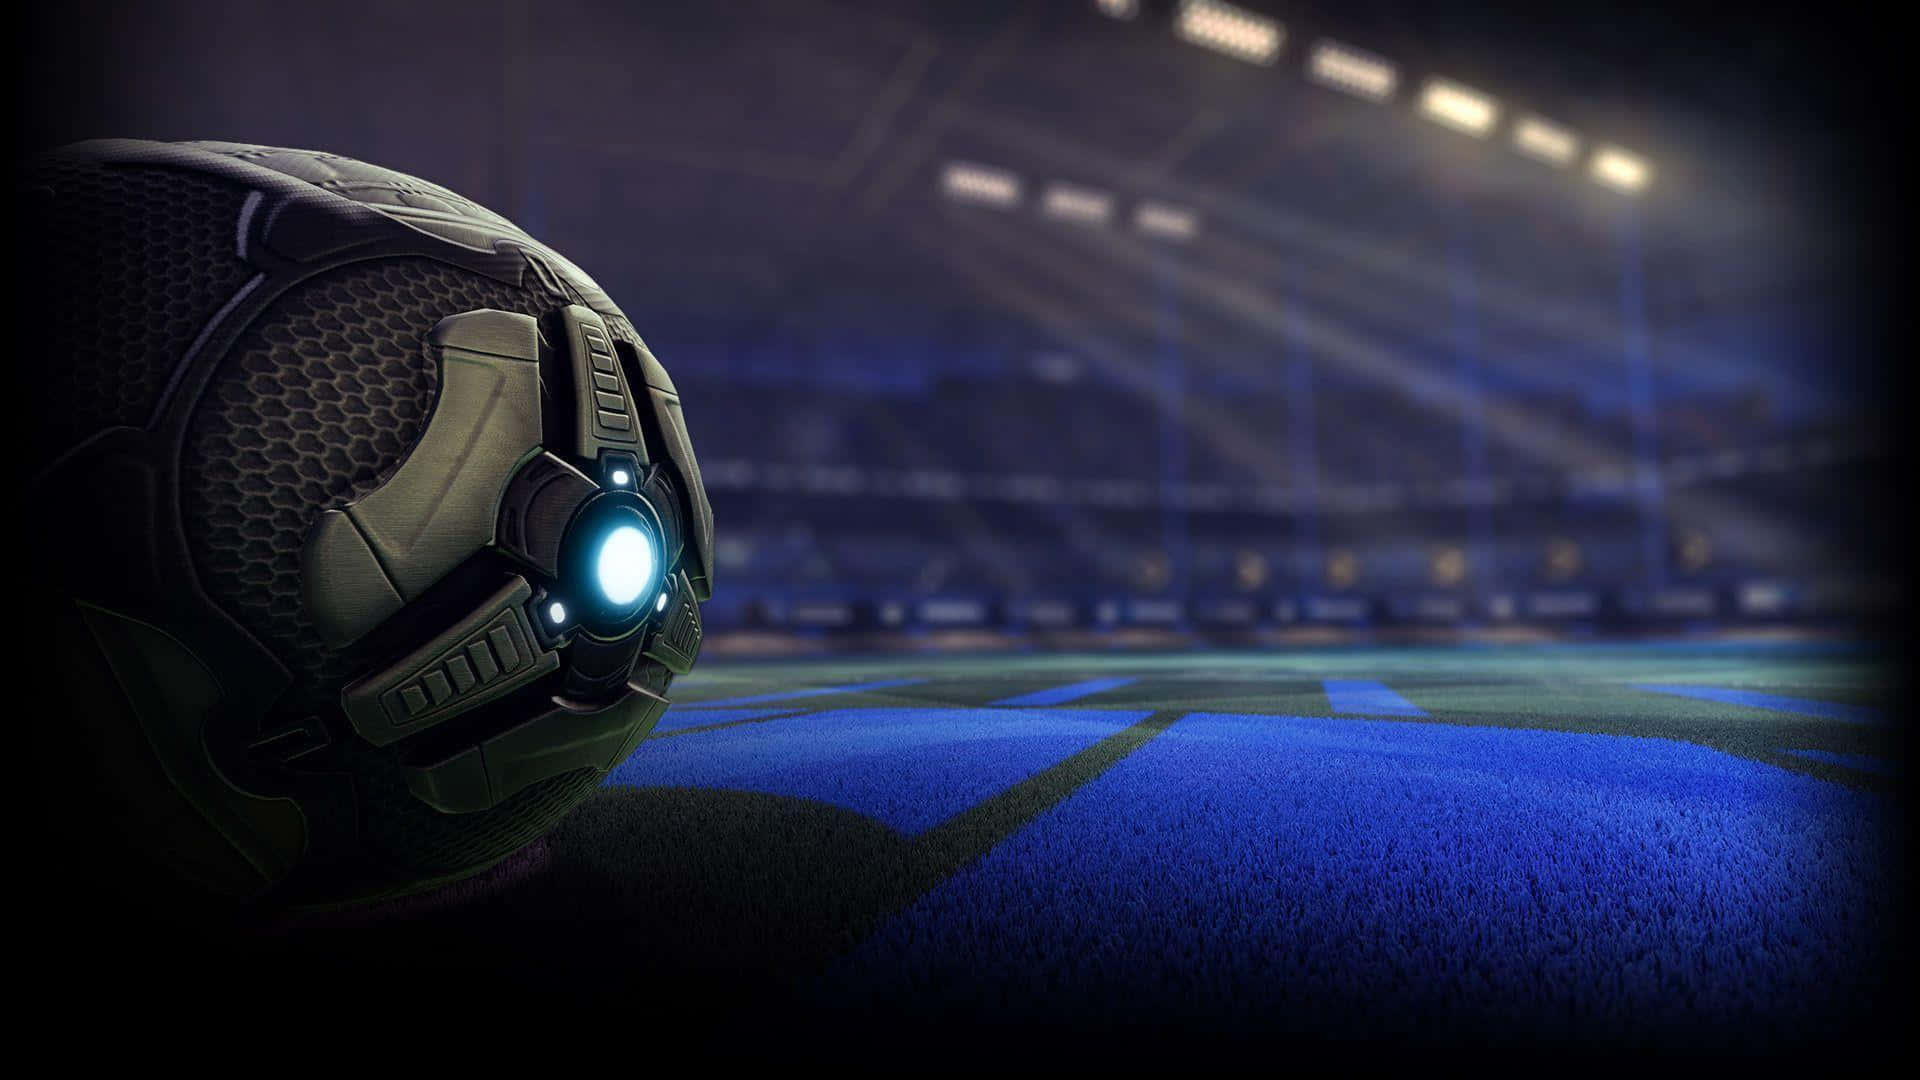 Boost speed and power up with Rocket League's 1920x1080 resolution